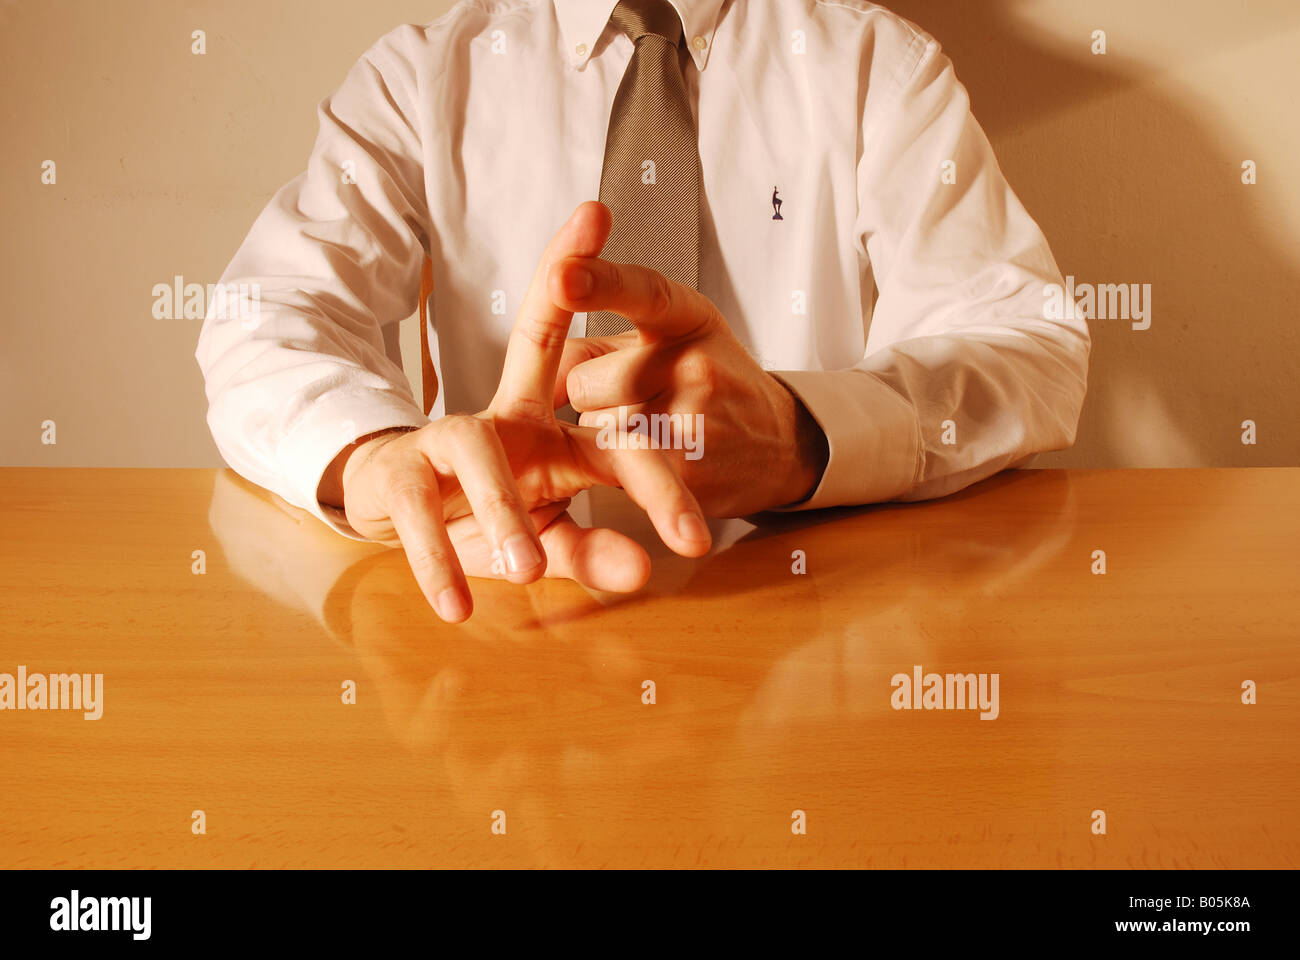 Hand gestures: counting with fingers. Stock Photo